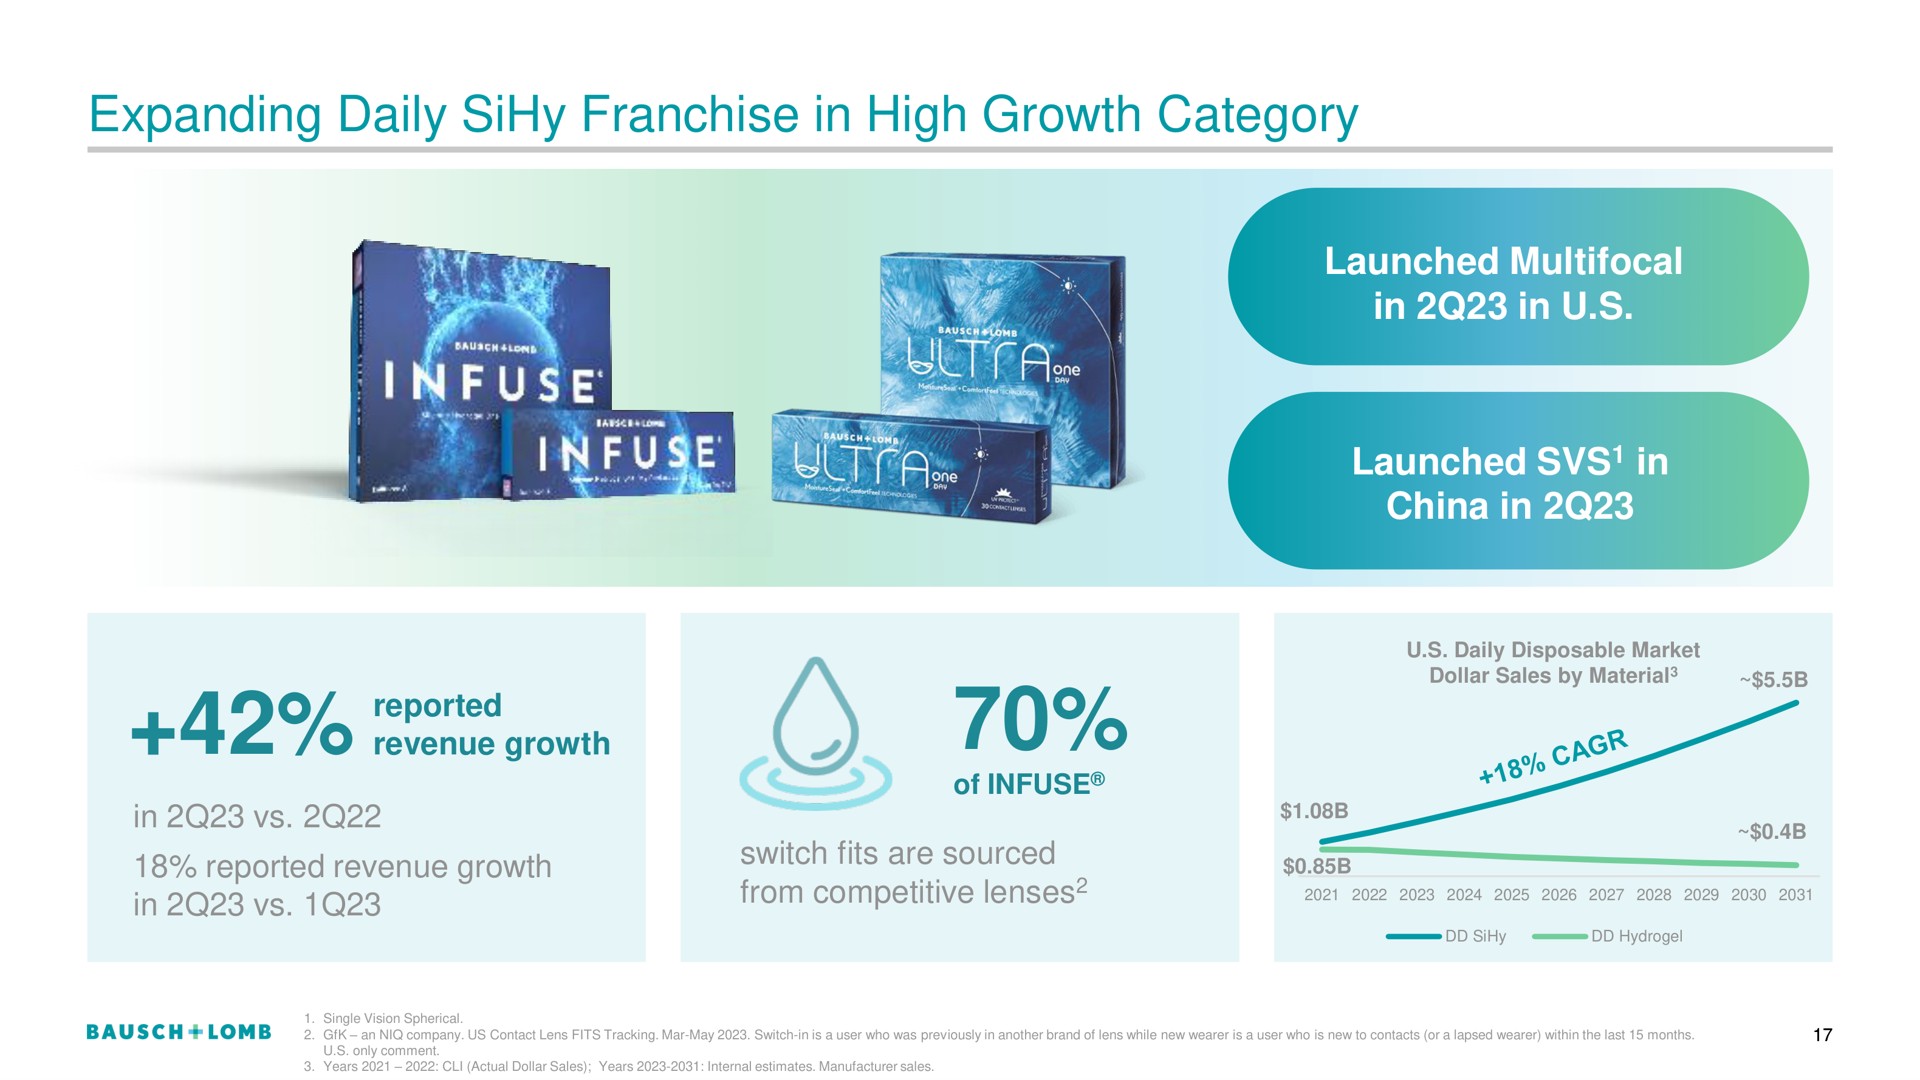 expanding daily franchise in high growth category | Bausch+Lomb